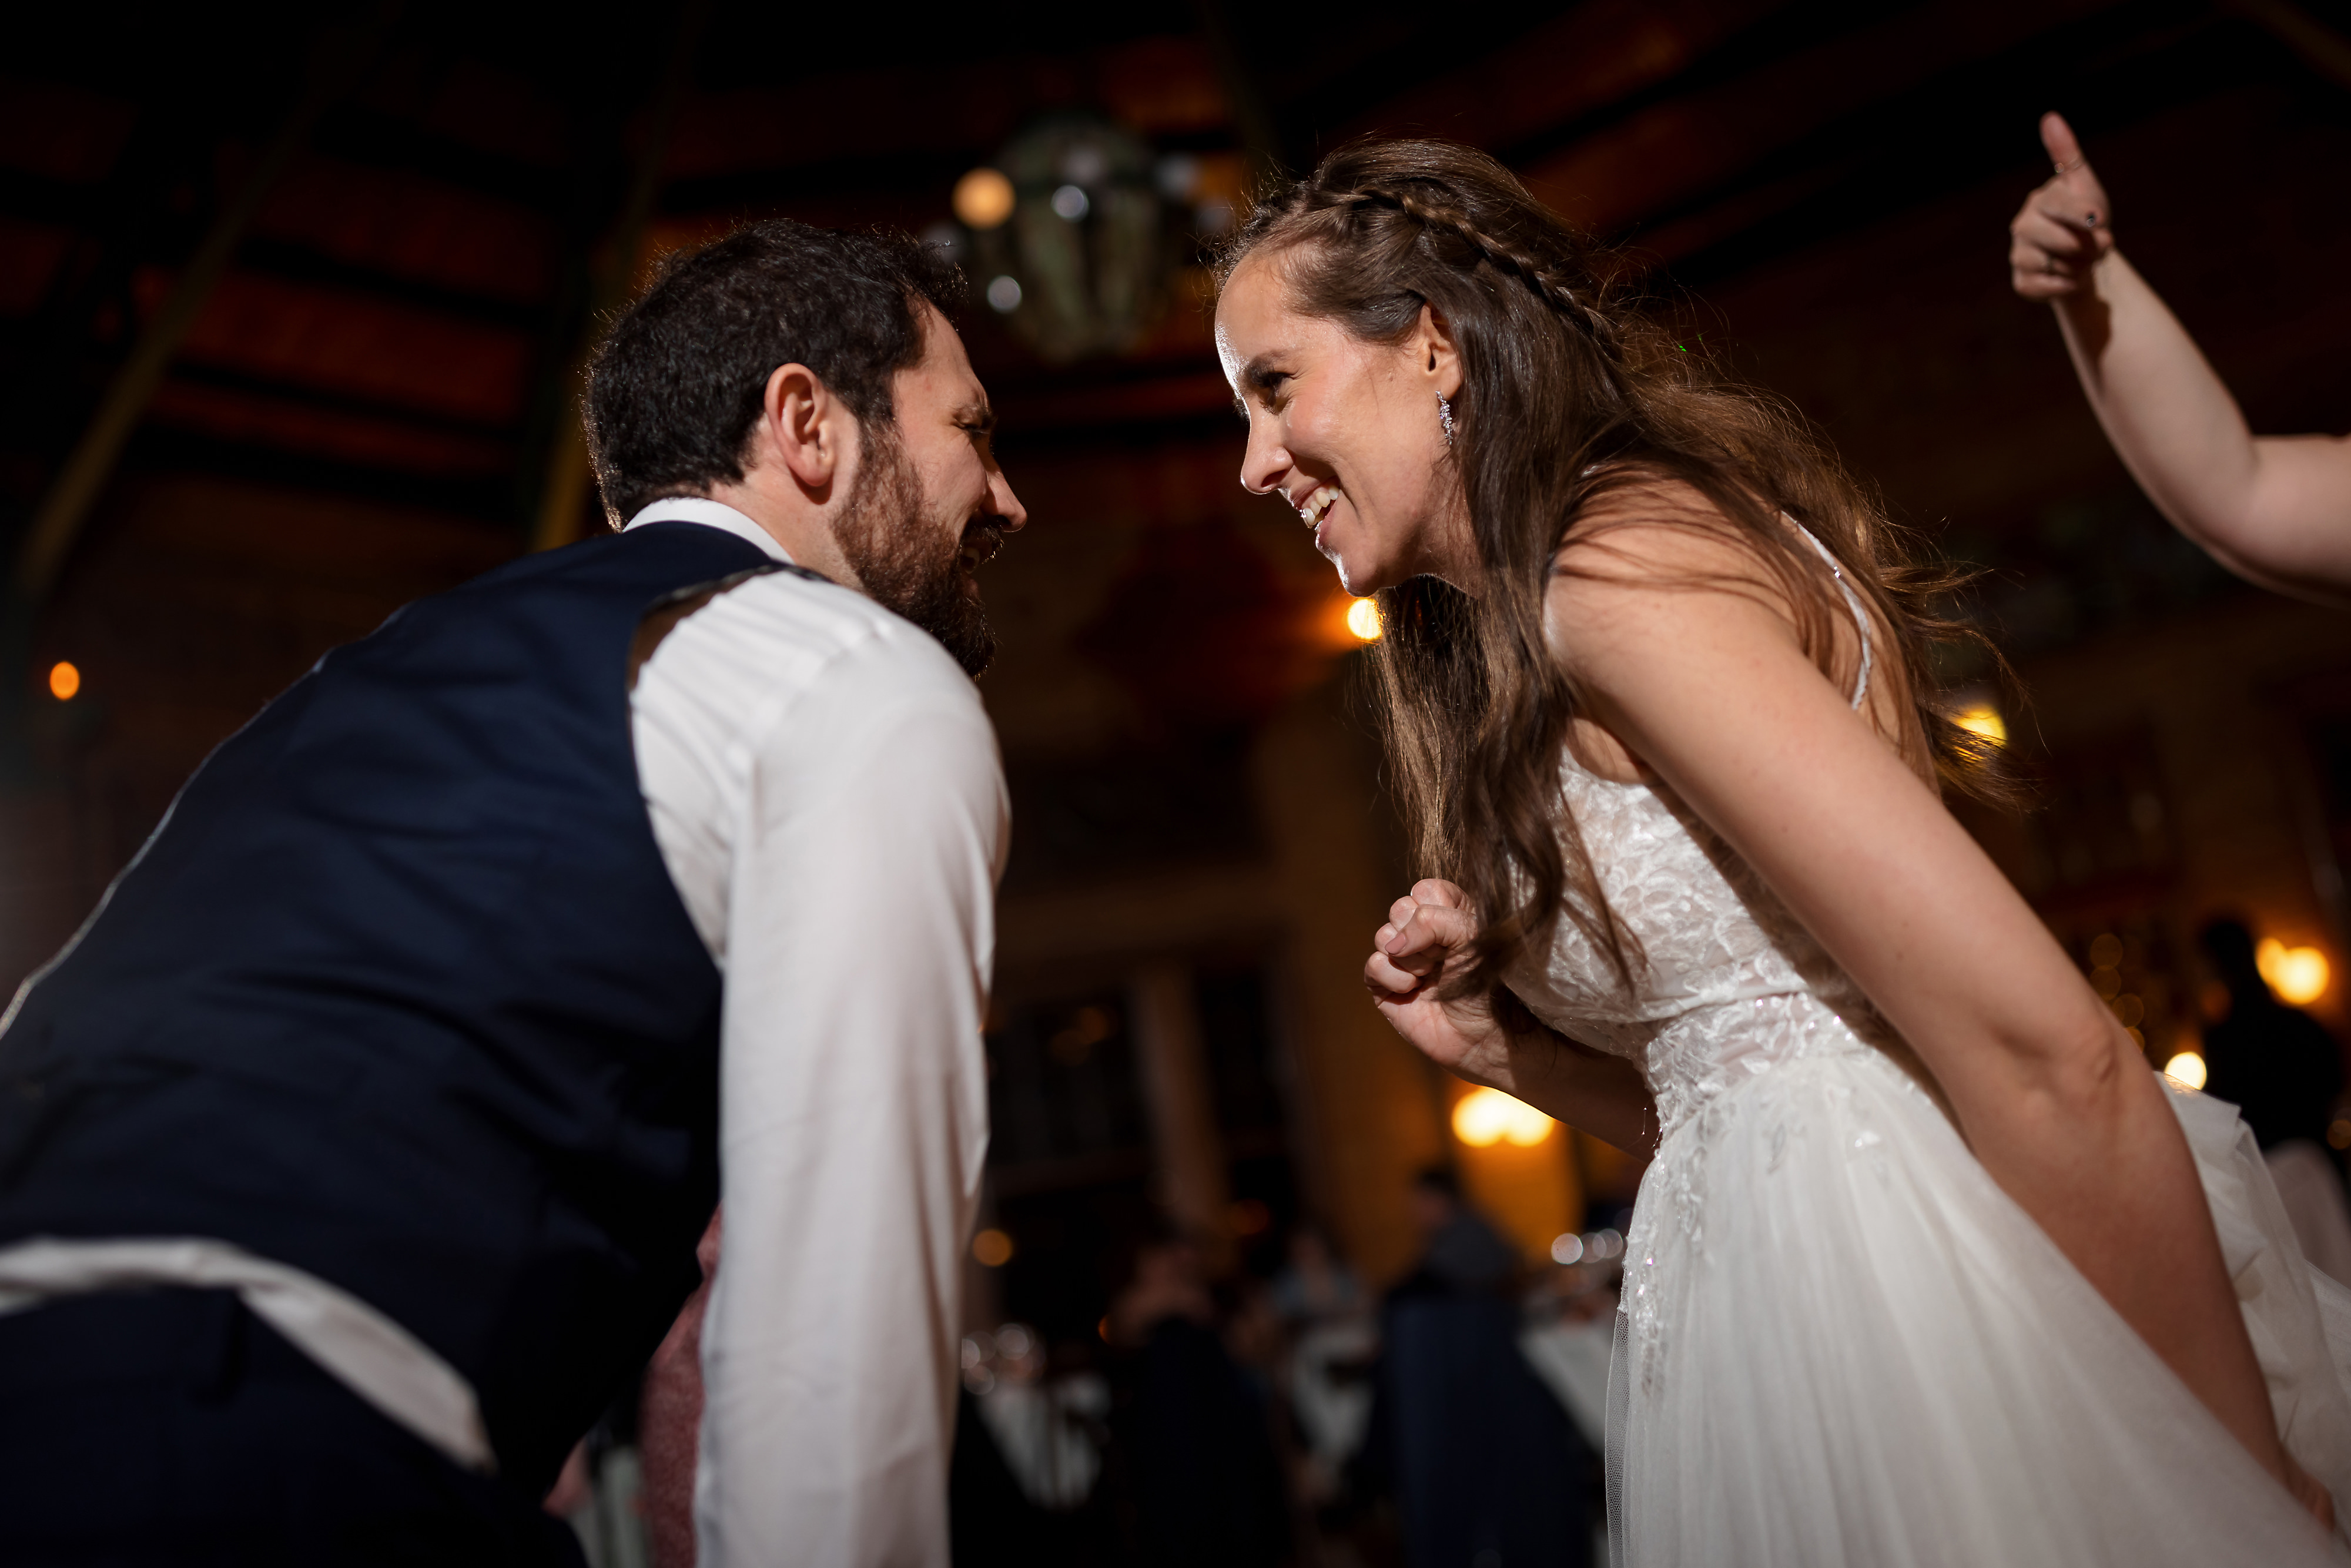 bride and groom dancing during wedding reception at Cafe Brauer in Chicago's Lincoln Park neighborhood